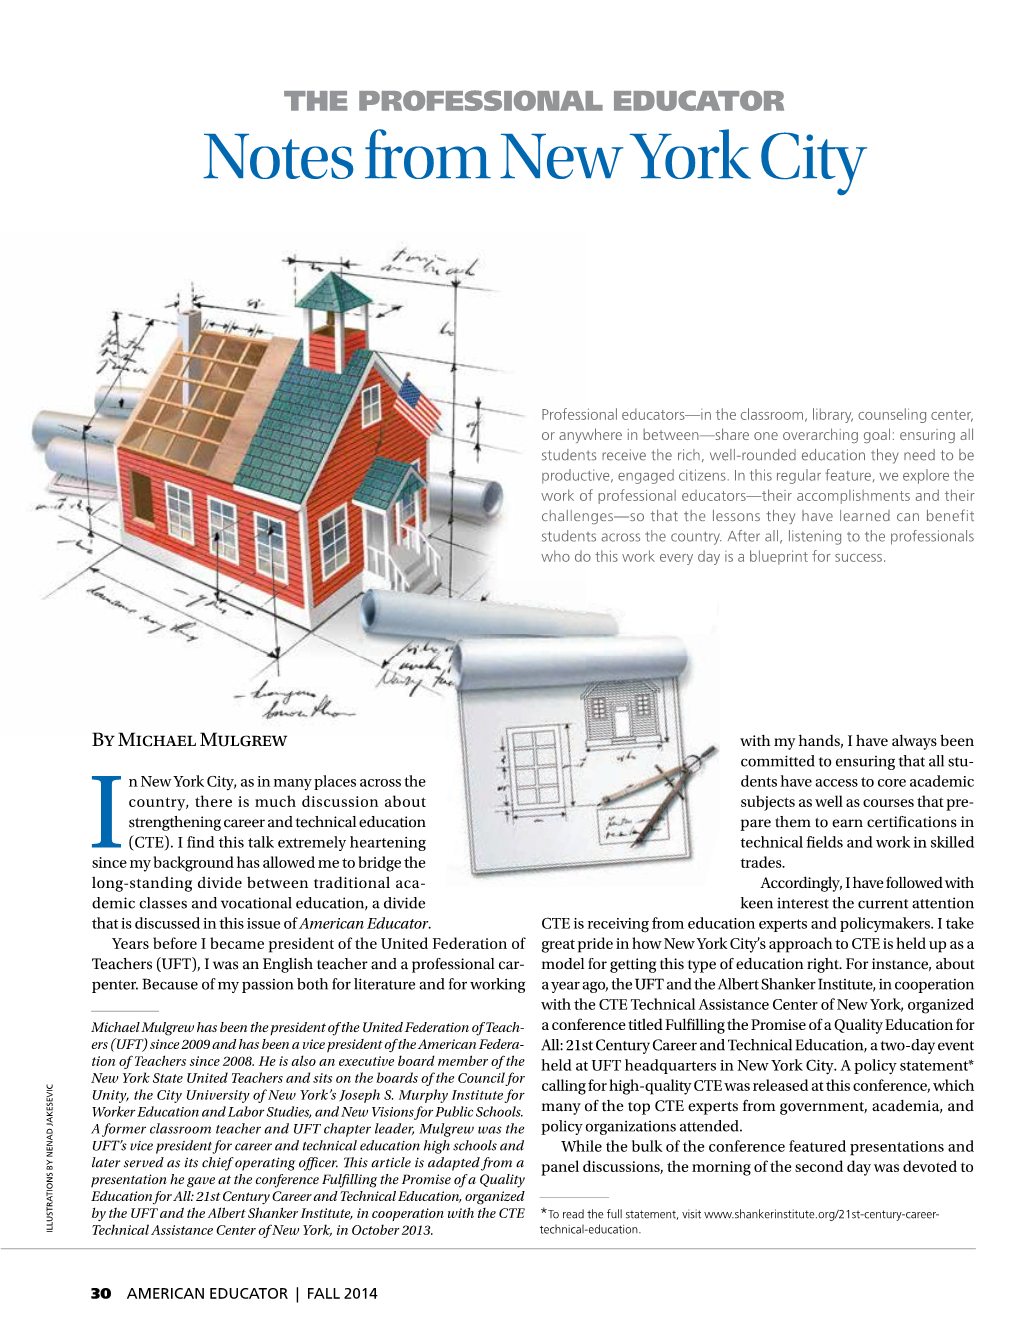 The Professional Educator: Notes from New York City, by Michael